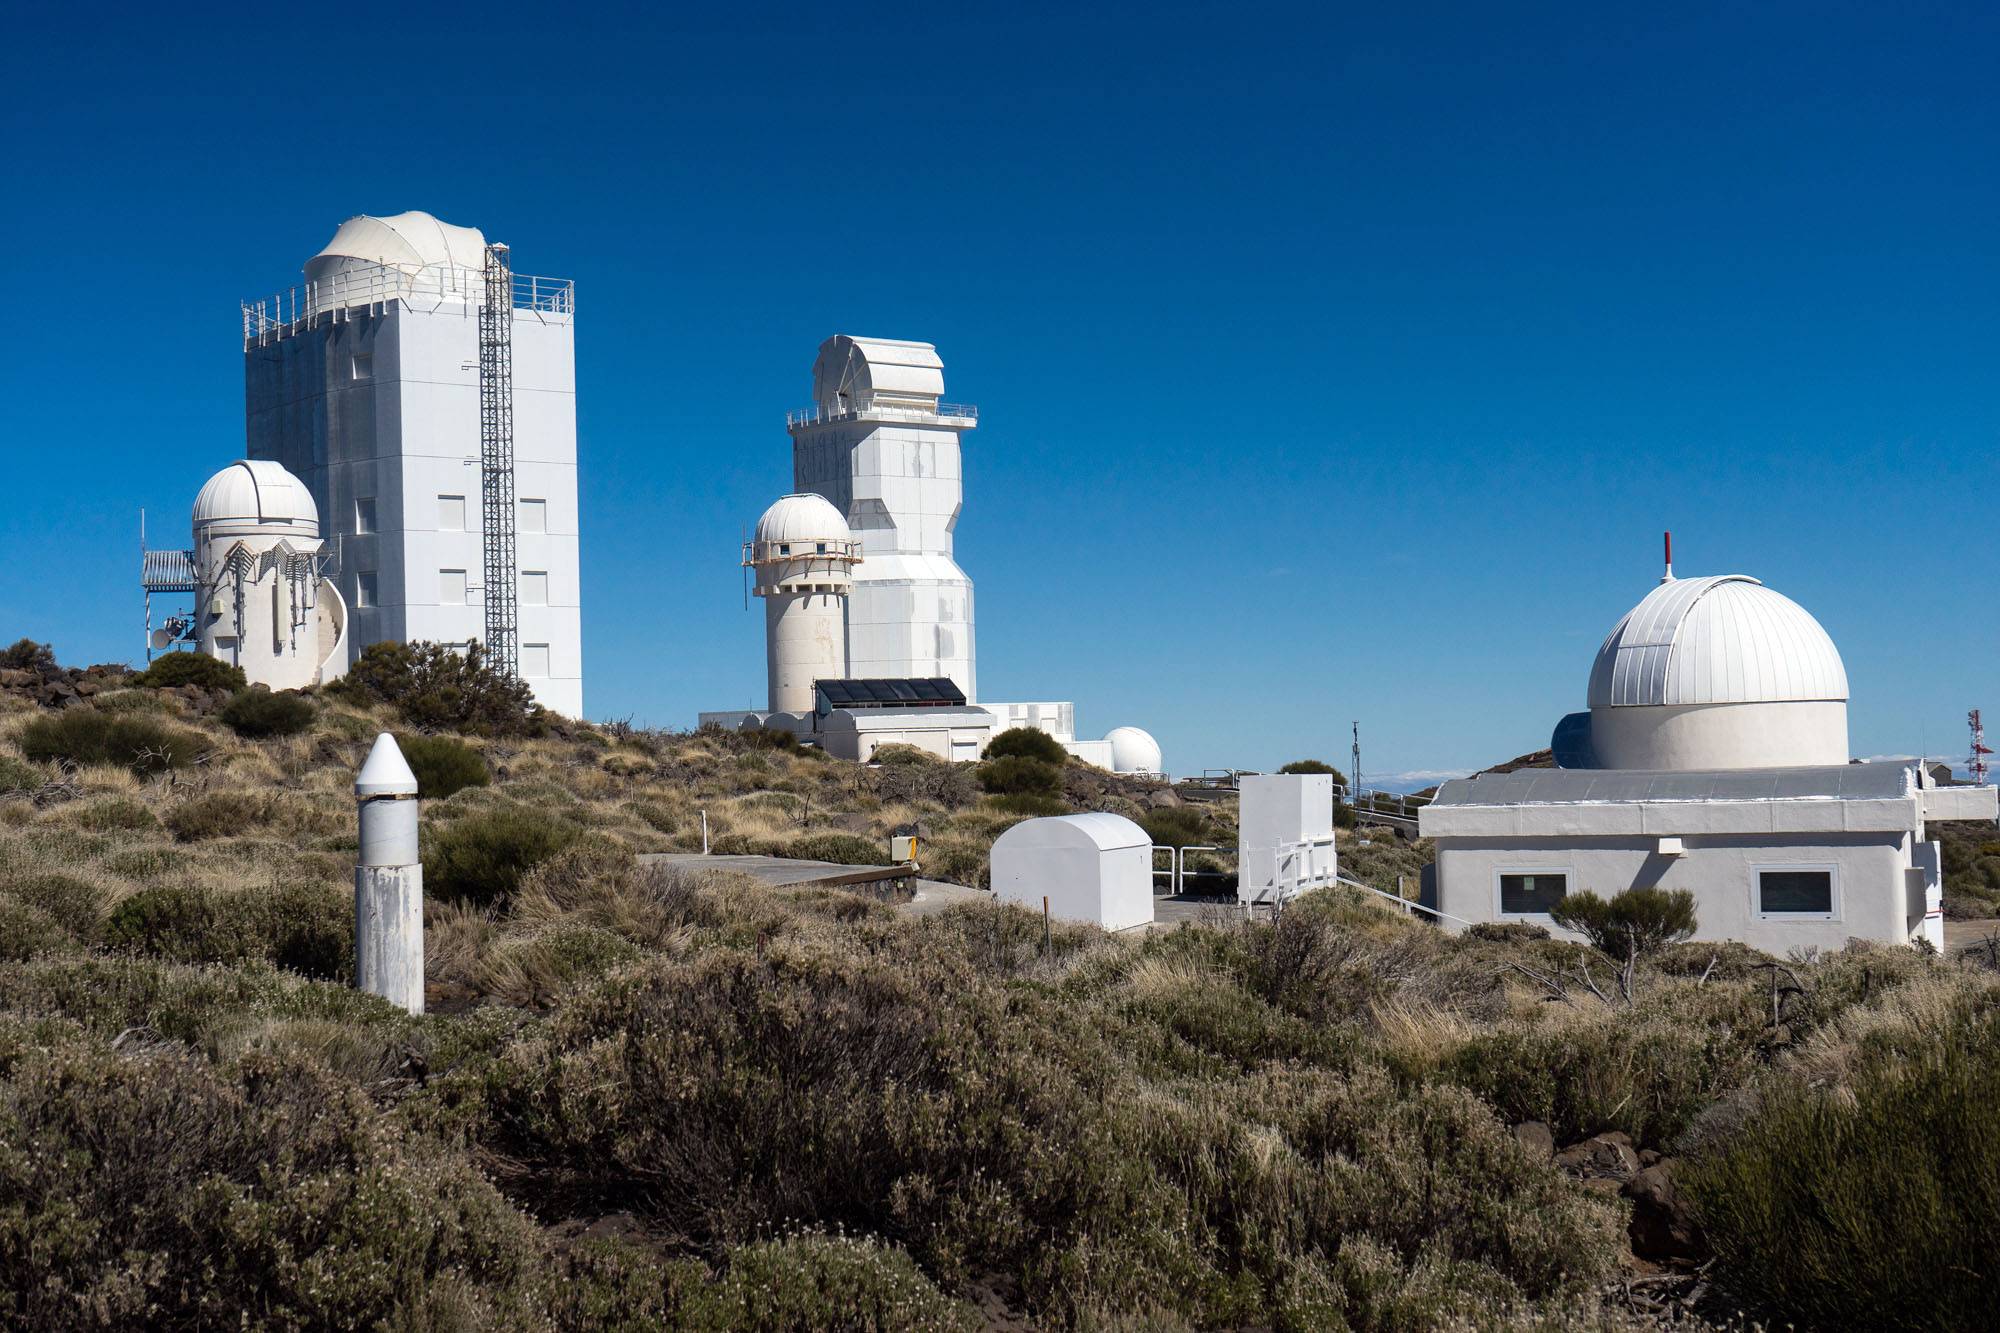 Visiting the Izaña Observatory
